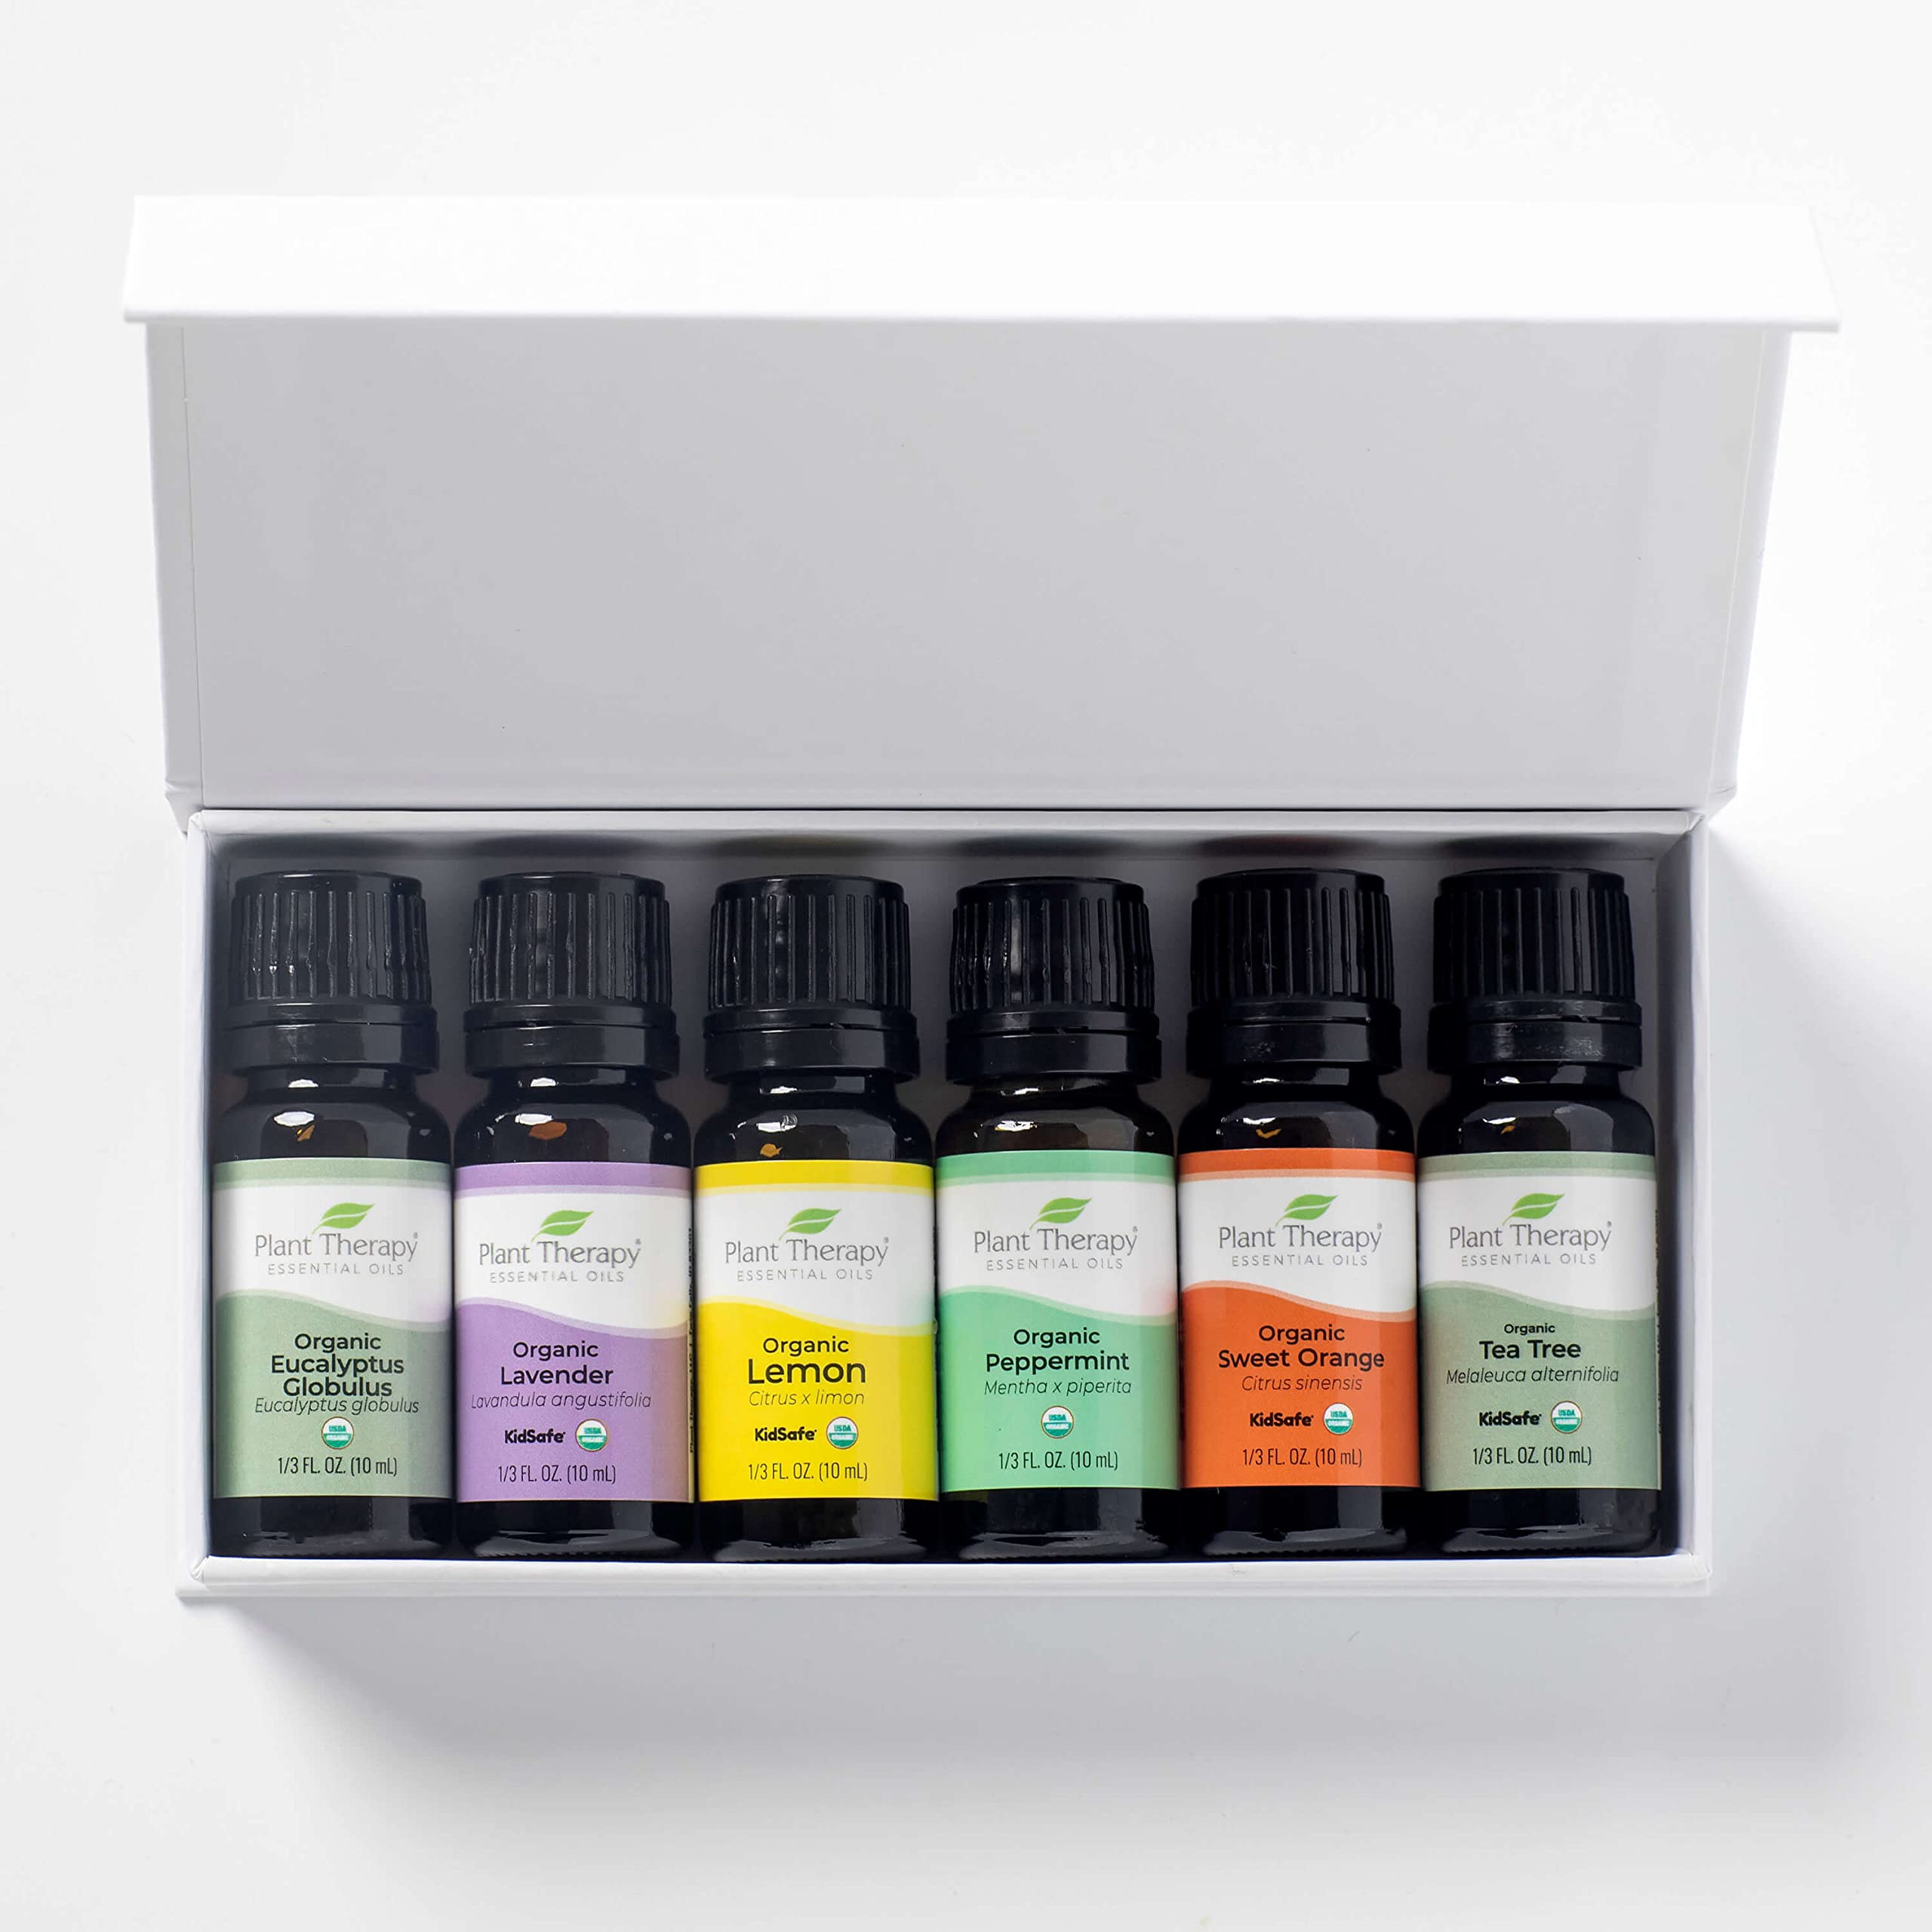 Plant Therapy Top 6 USDA Organic Essential Oil Set - Lavender, Peppermint, Eucalyptus, Lemon, Tea Tree 100% Pure, Natural Aromatherapy, For Diffusion & Topical Use, Therapeutic Grade 10 mL (1/3 oz)